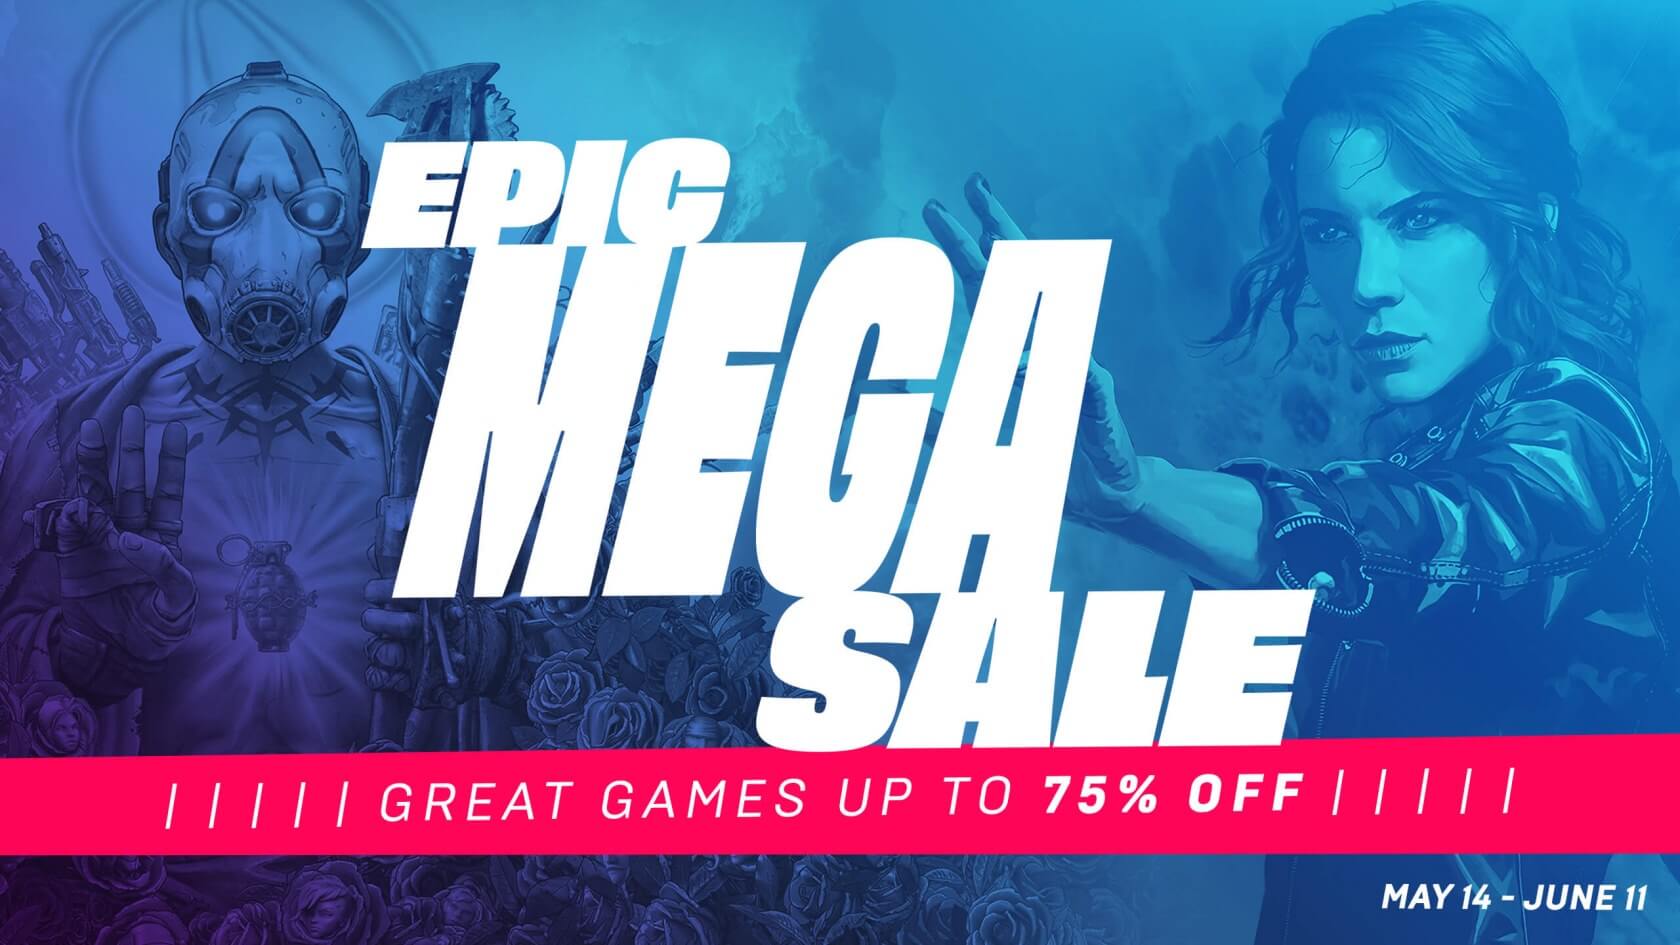 Epic launches its second Mega Sale, bringing back unlimited $10 coupons